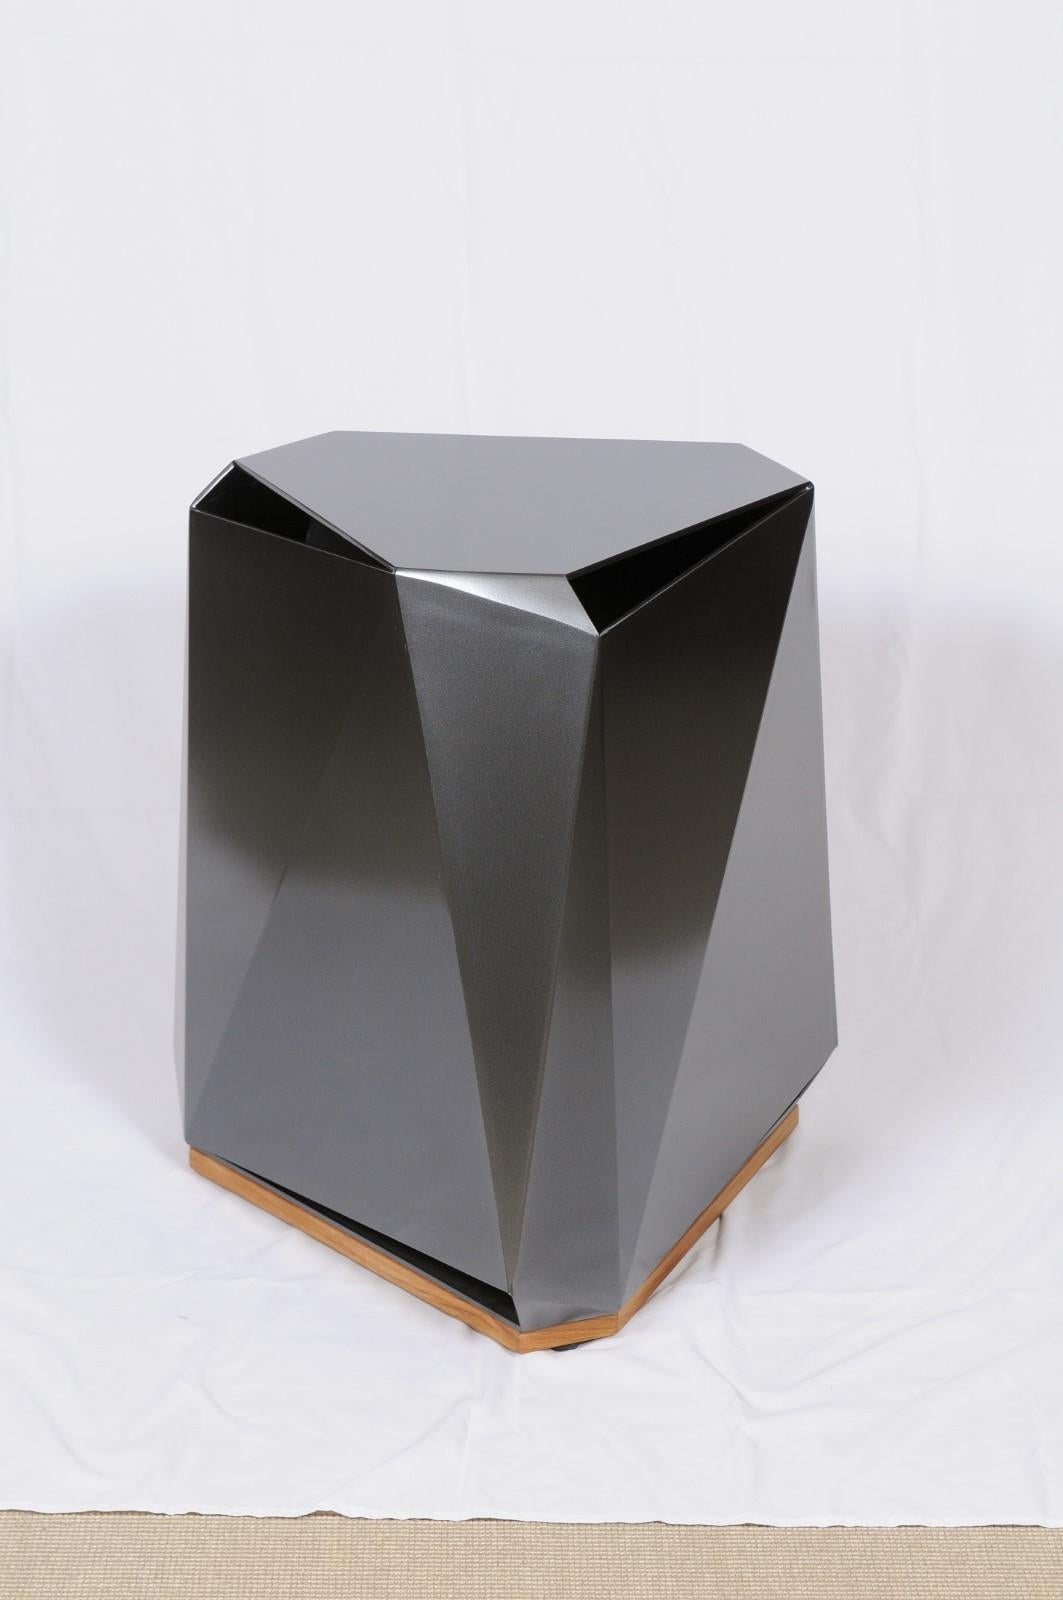 The Steven Volpe Coburg faceted side table is modern in design and material, and provides a strong counterpoint to the other pieces of The Steven Volpe collection. Pushing the boundaries of plate aluminum bending, the metal multifaceted table is